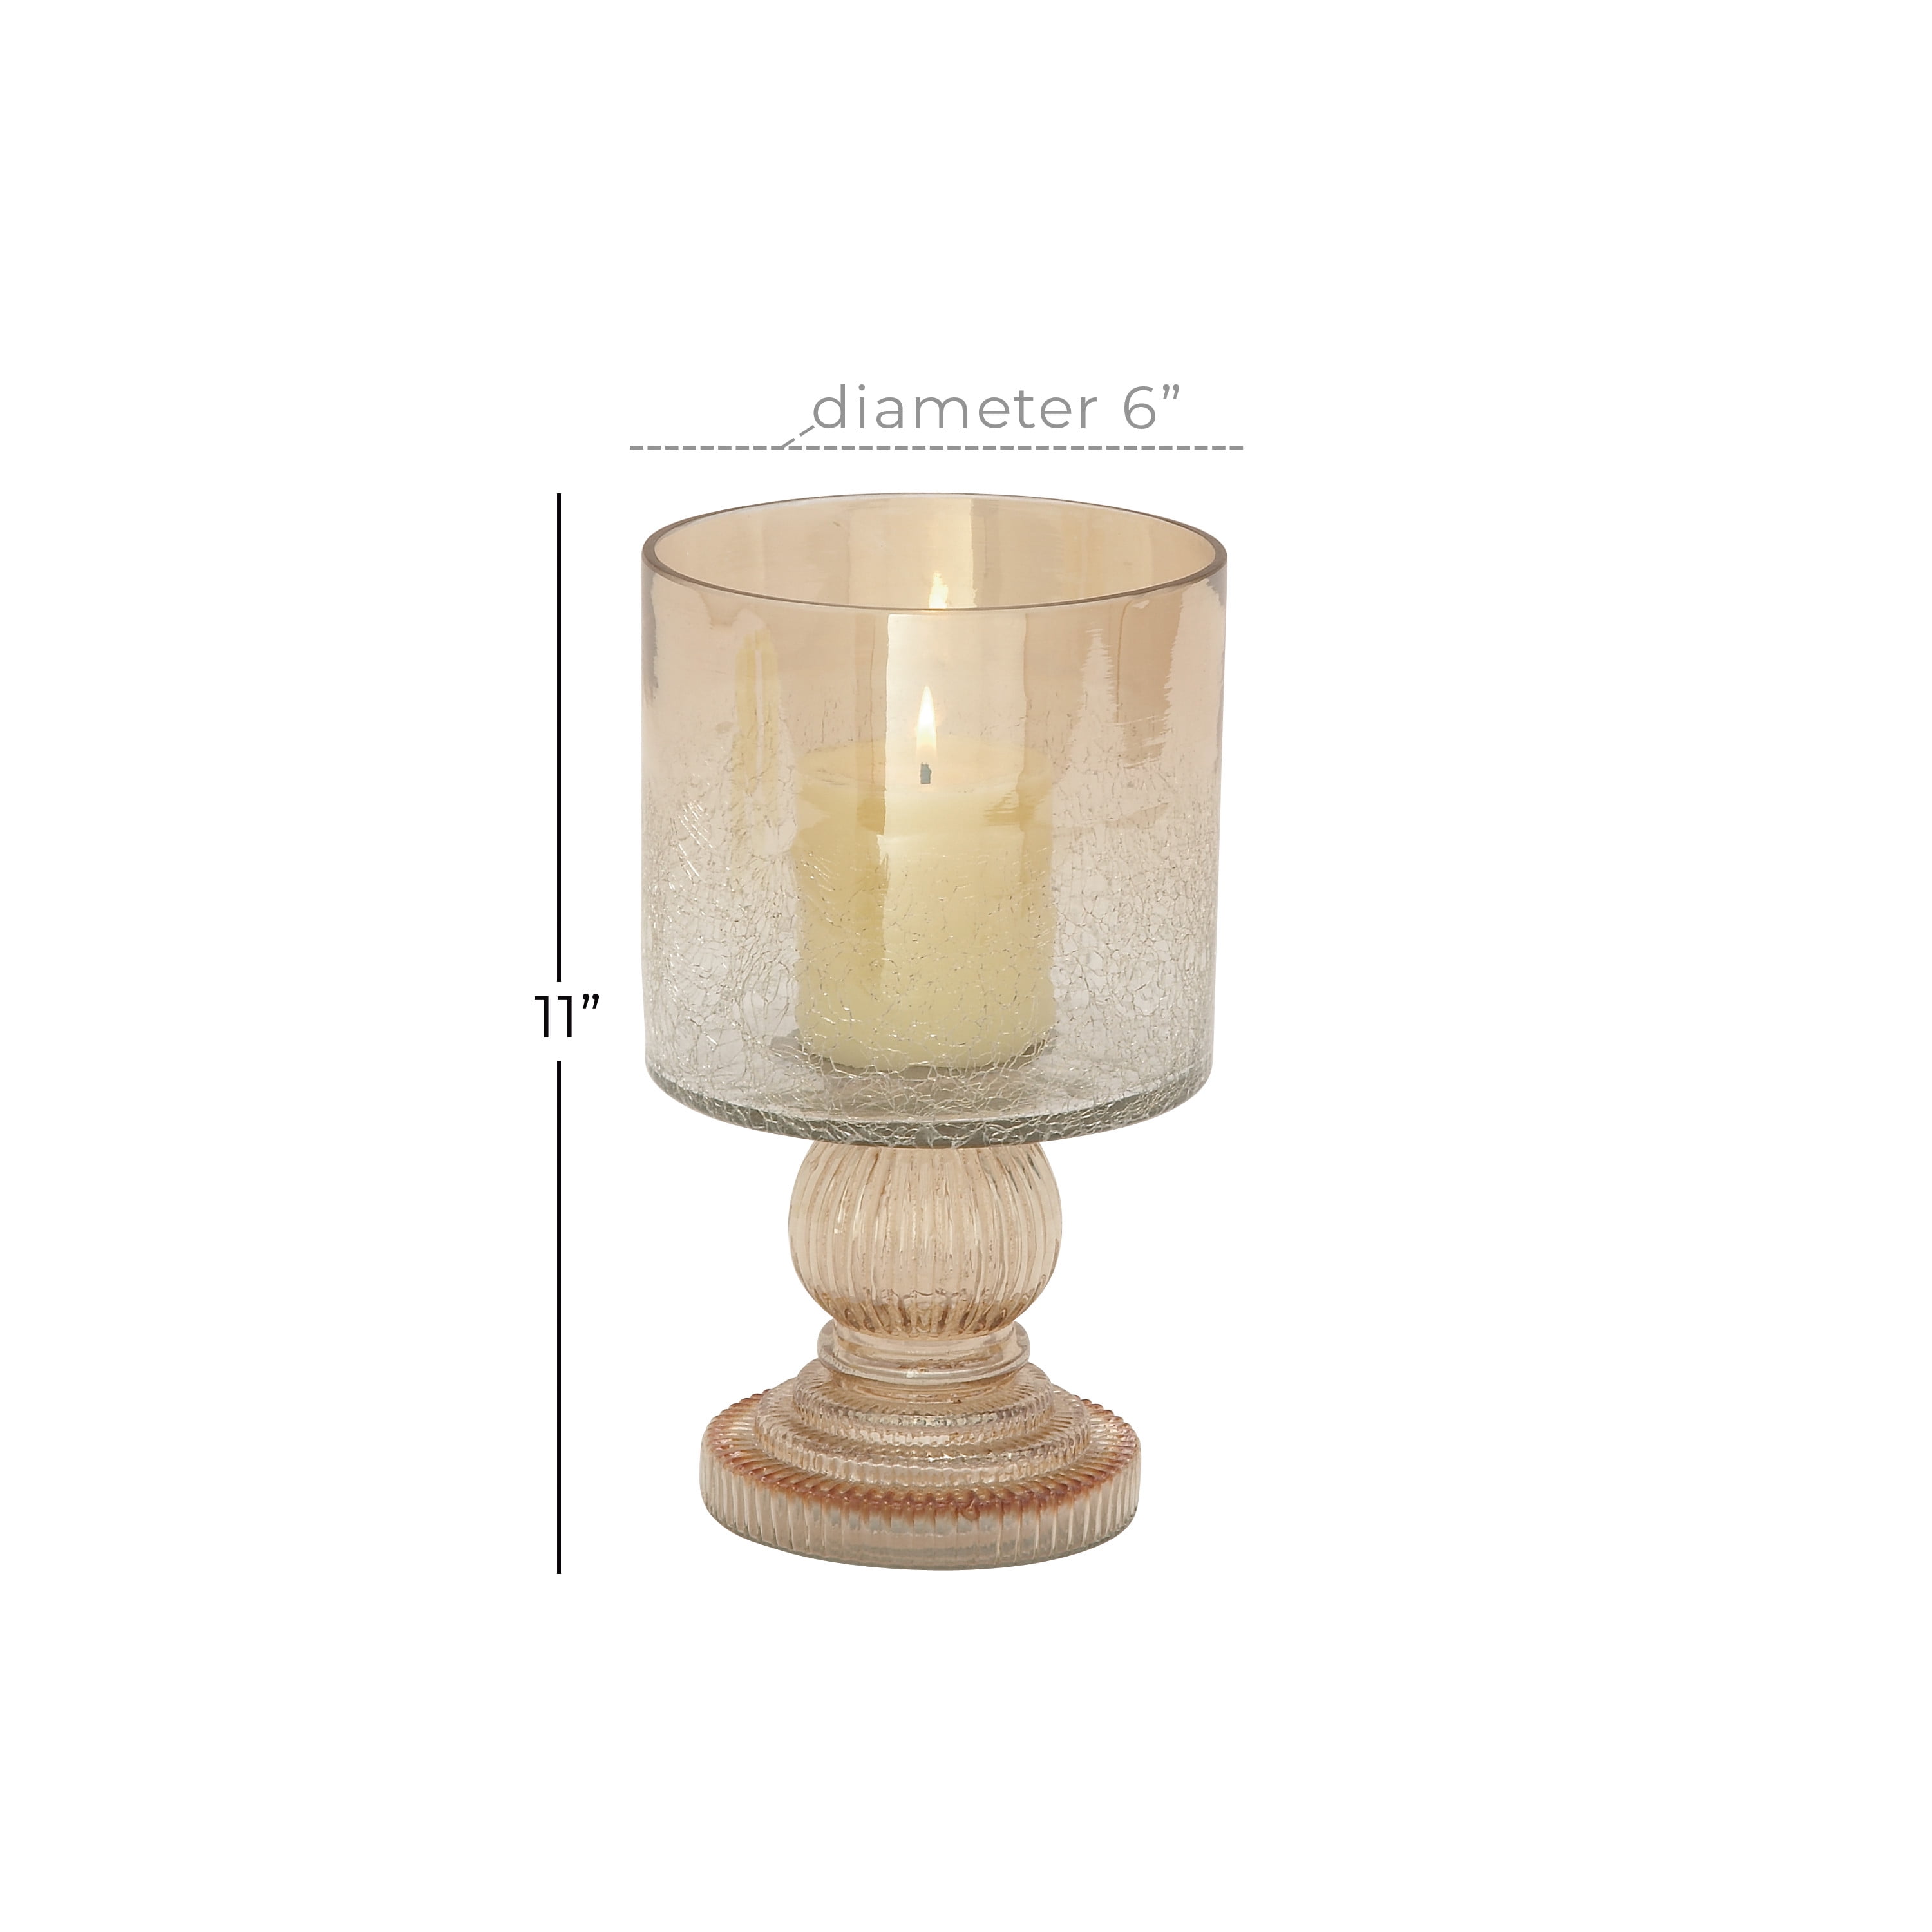 Rustic Hurricane Lantern Candle Holder with Glass Globe - Hand-Carved  Wooden Pillar